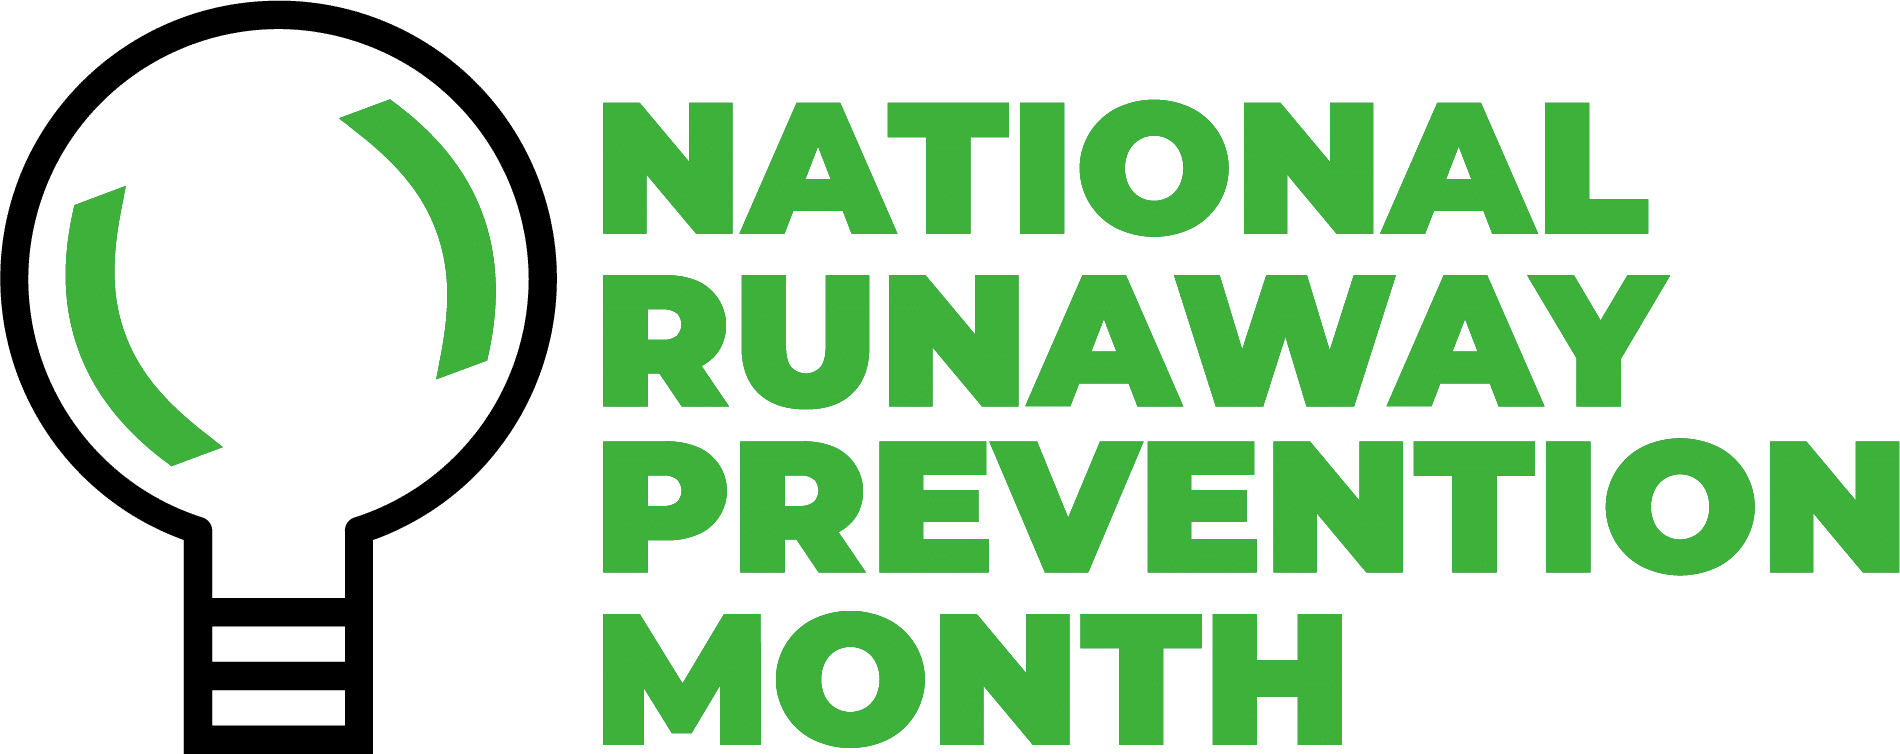 National Runaway Prevention Month (NRPM)